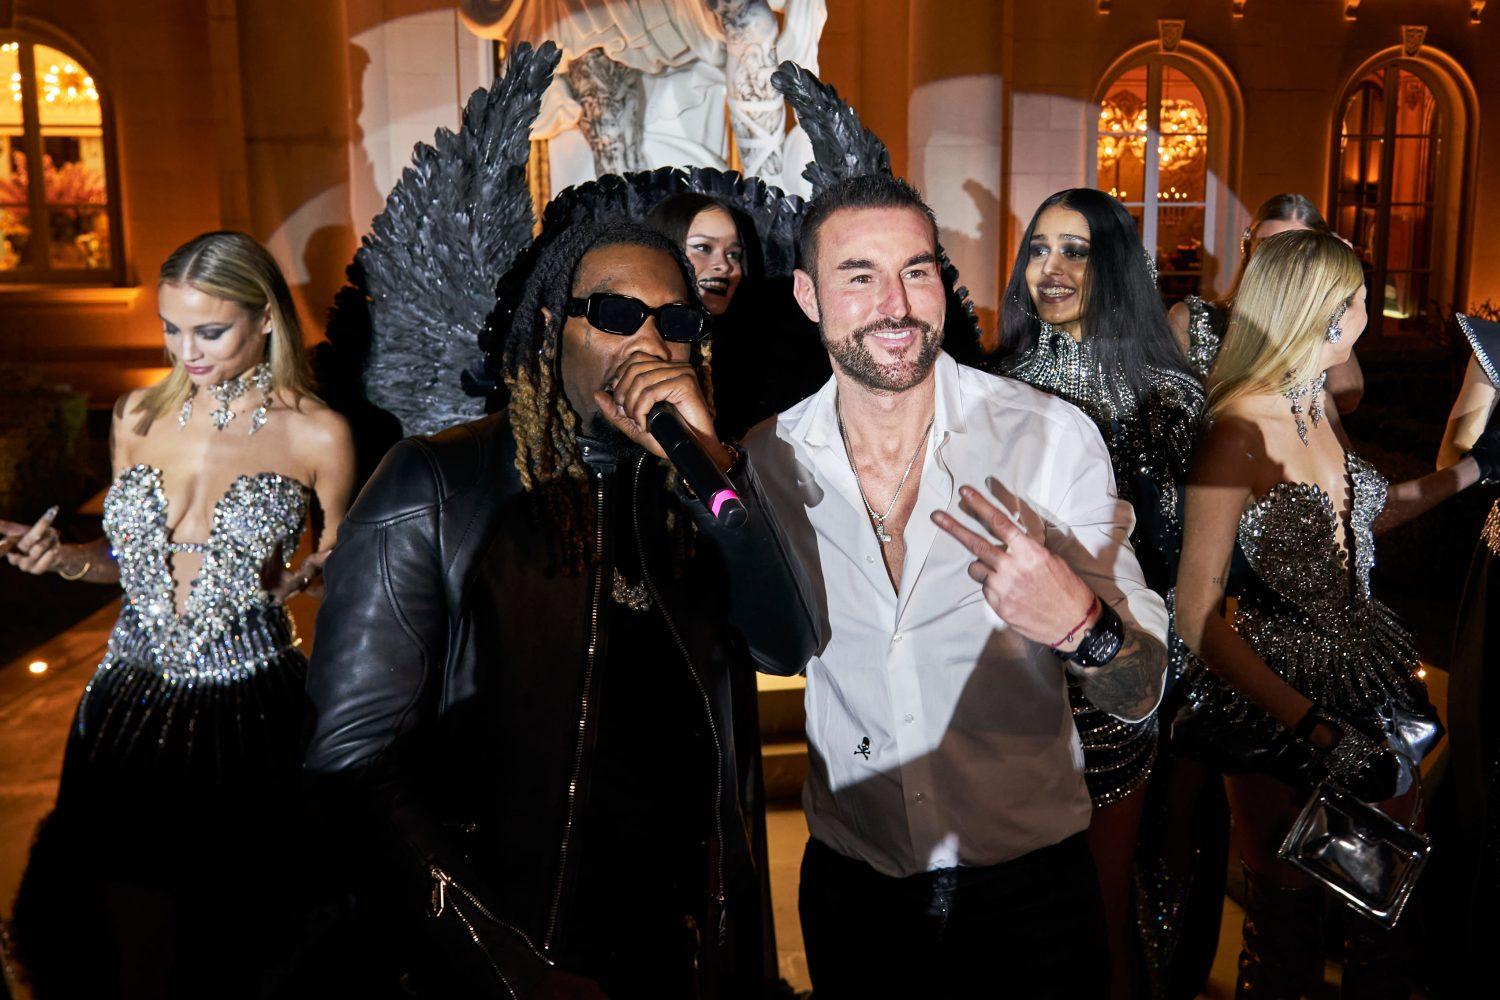 Offset and Philipp Plein at his pre oscar runway show in bel air